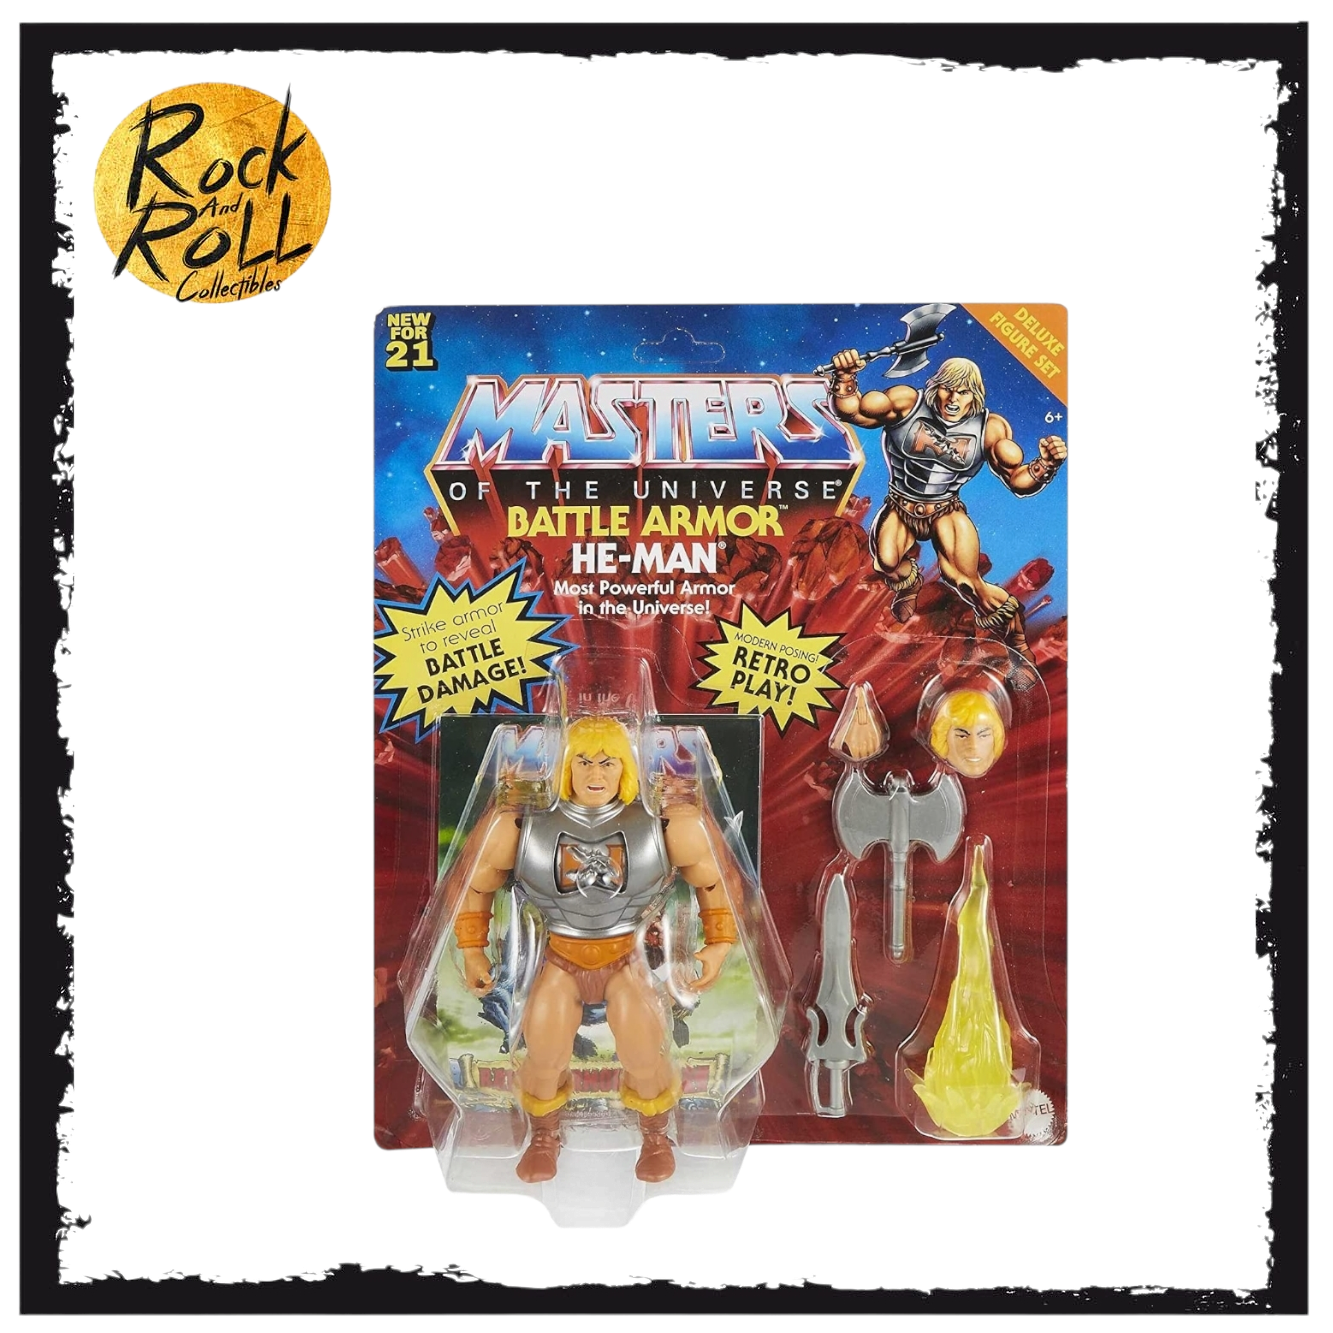 Masters of the Universe
Battle Armor He-man USA CARD